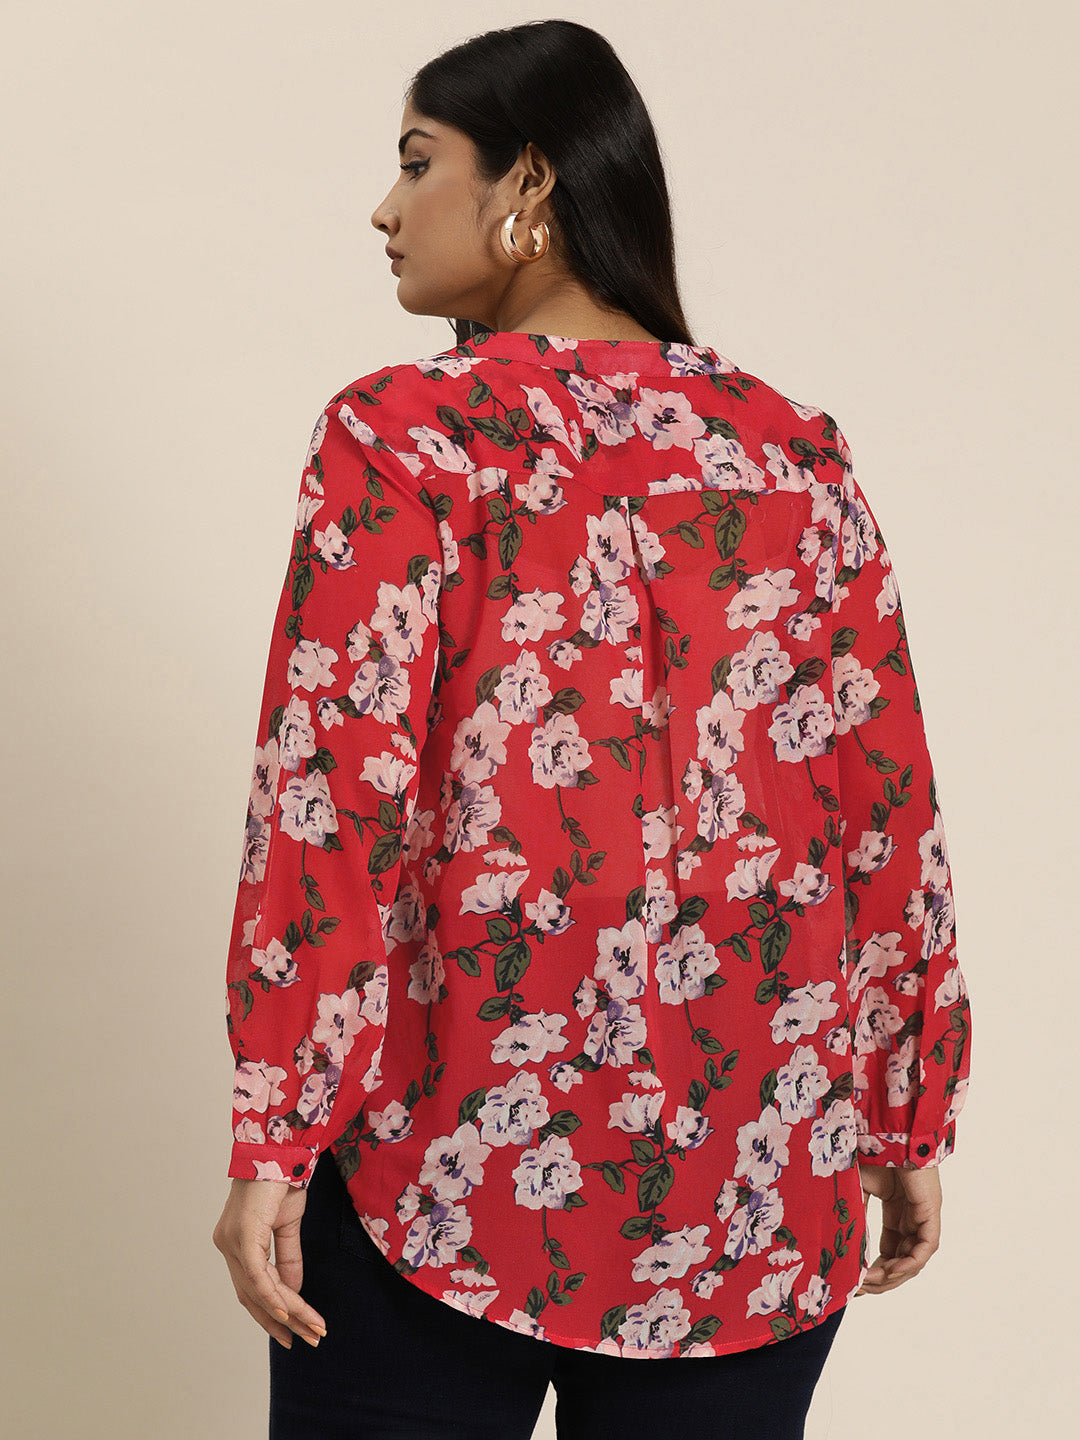 Red Floral georgette Half-Placket shirt with full cuff sleeves.